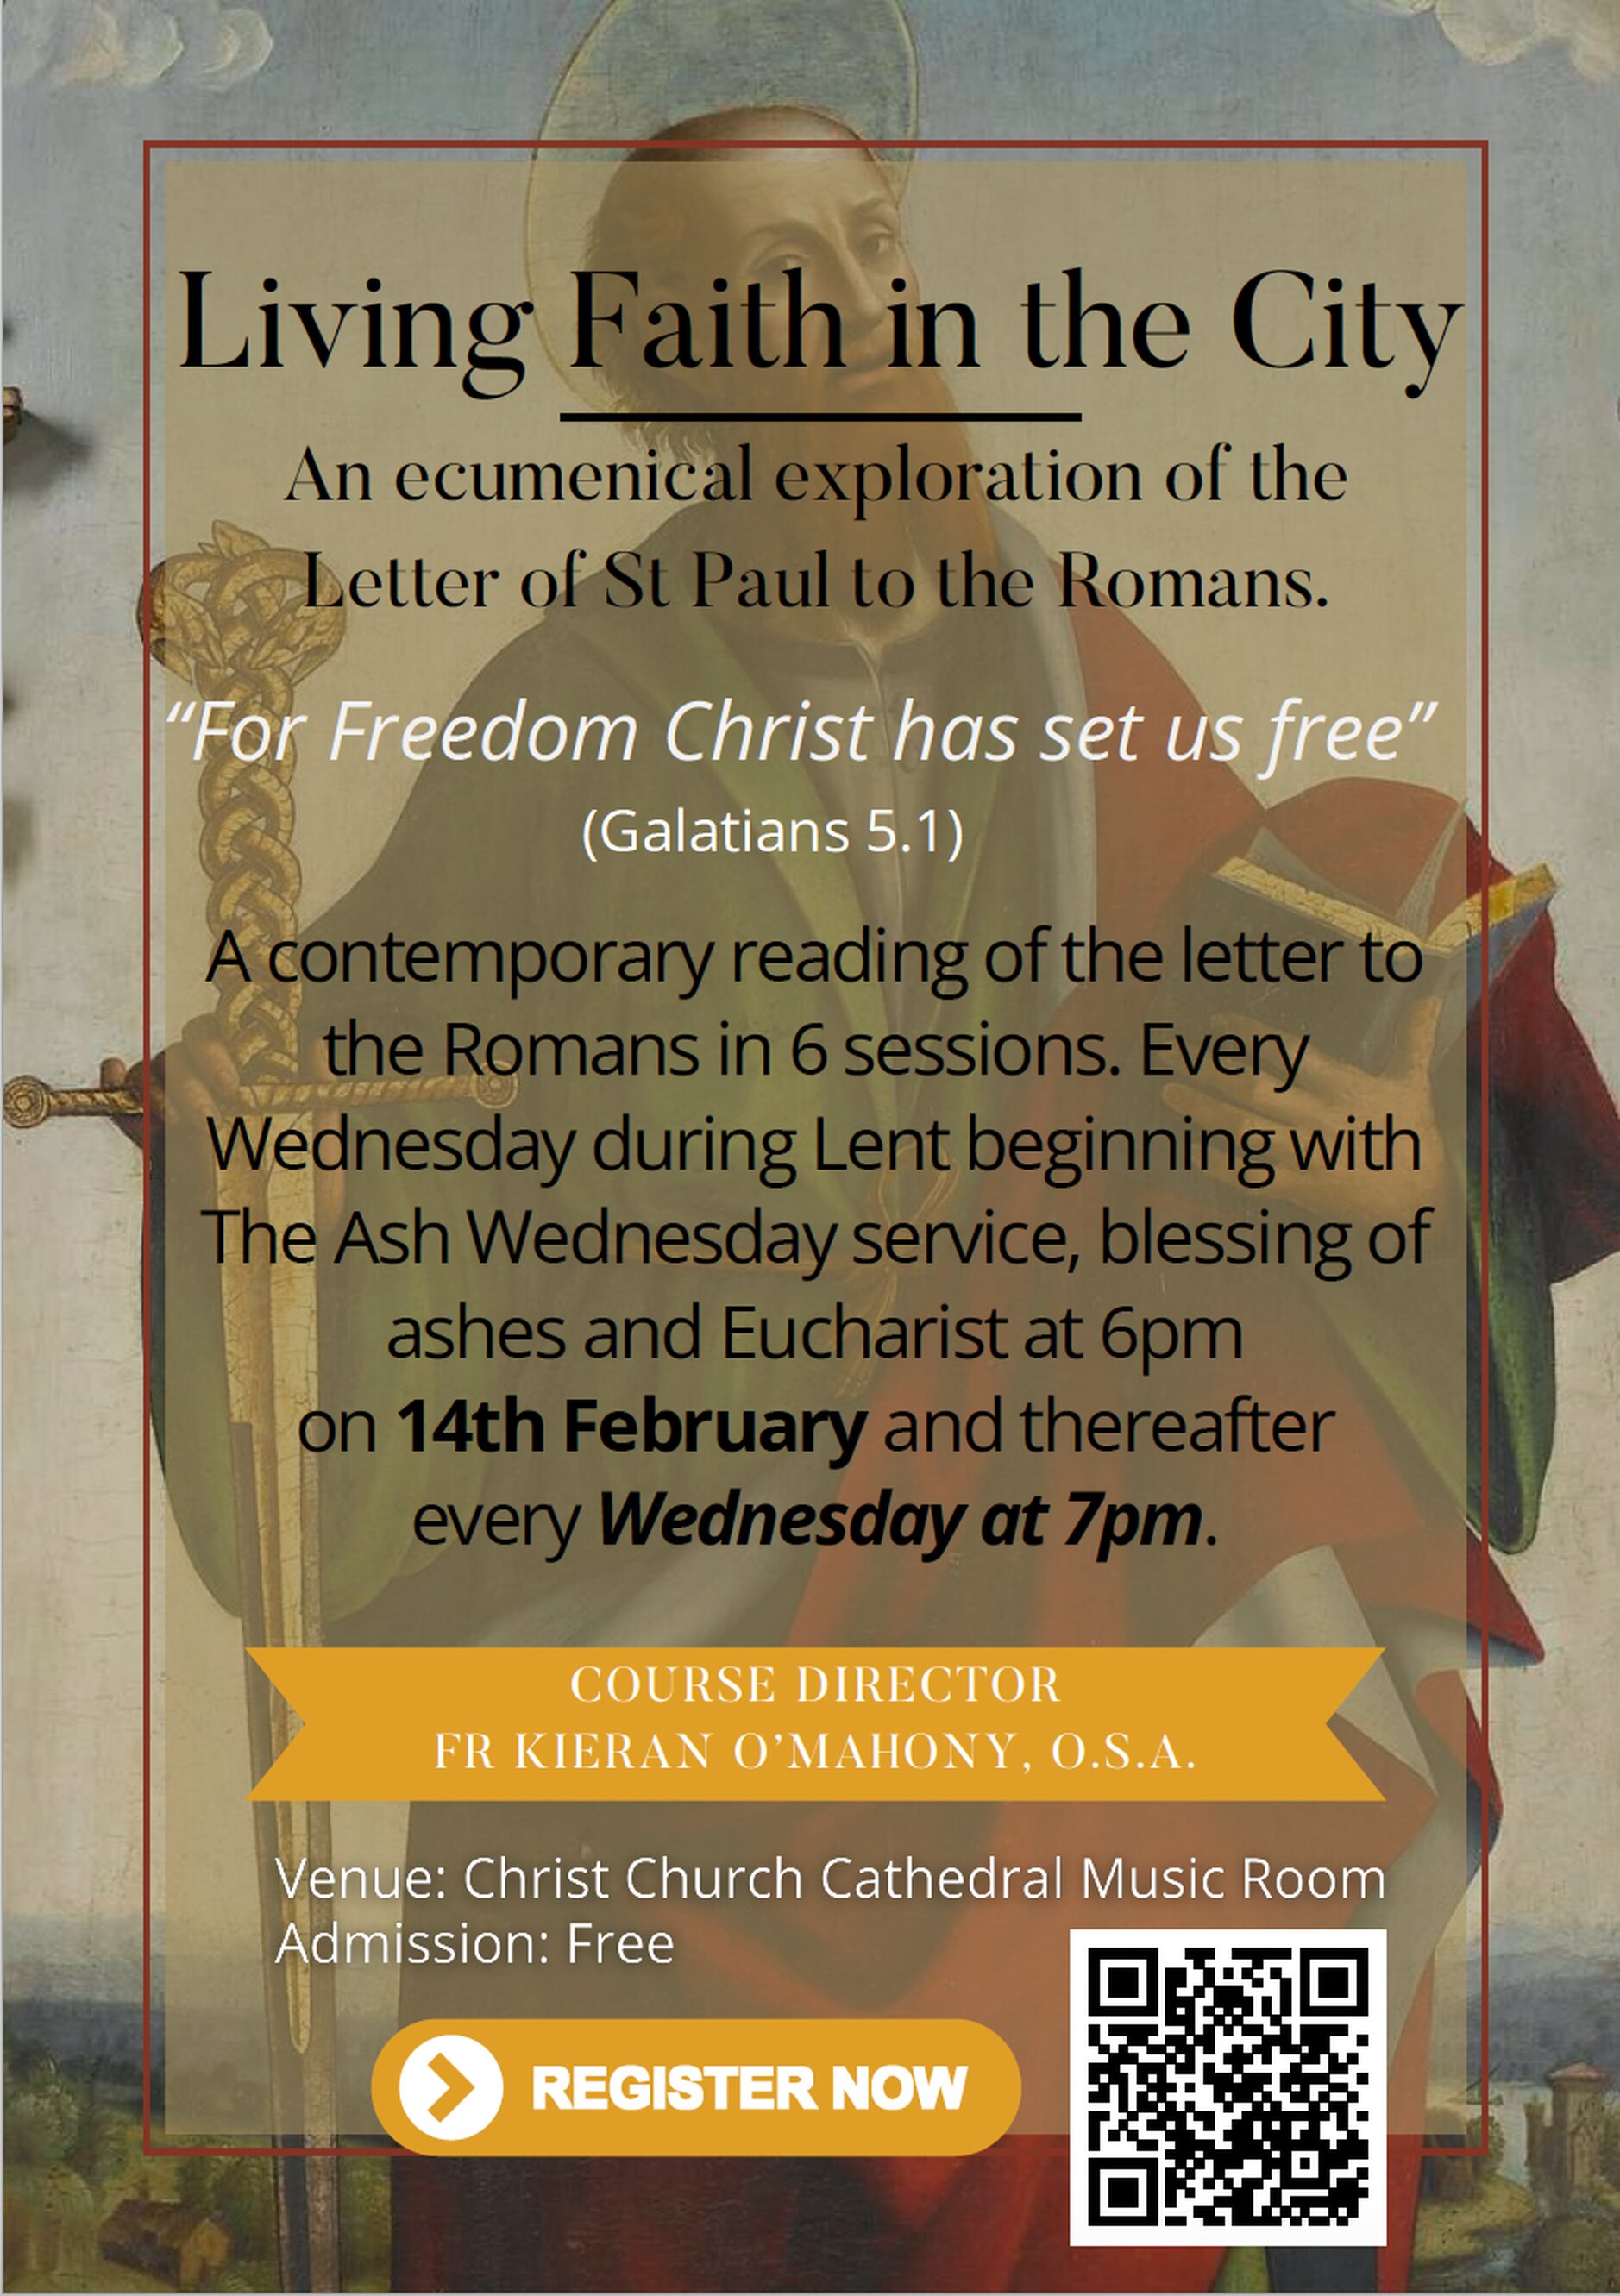 Living Faith in the City: An ecumenical exploration of the Letter of St Paul to the Romans - Wednesdays in Lent in Christ Church Cathedral. Starting February 14 @ 6pm.